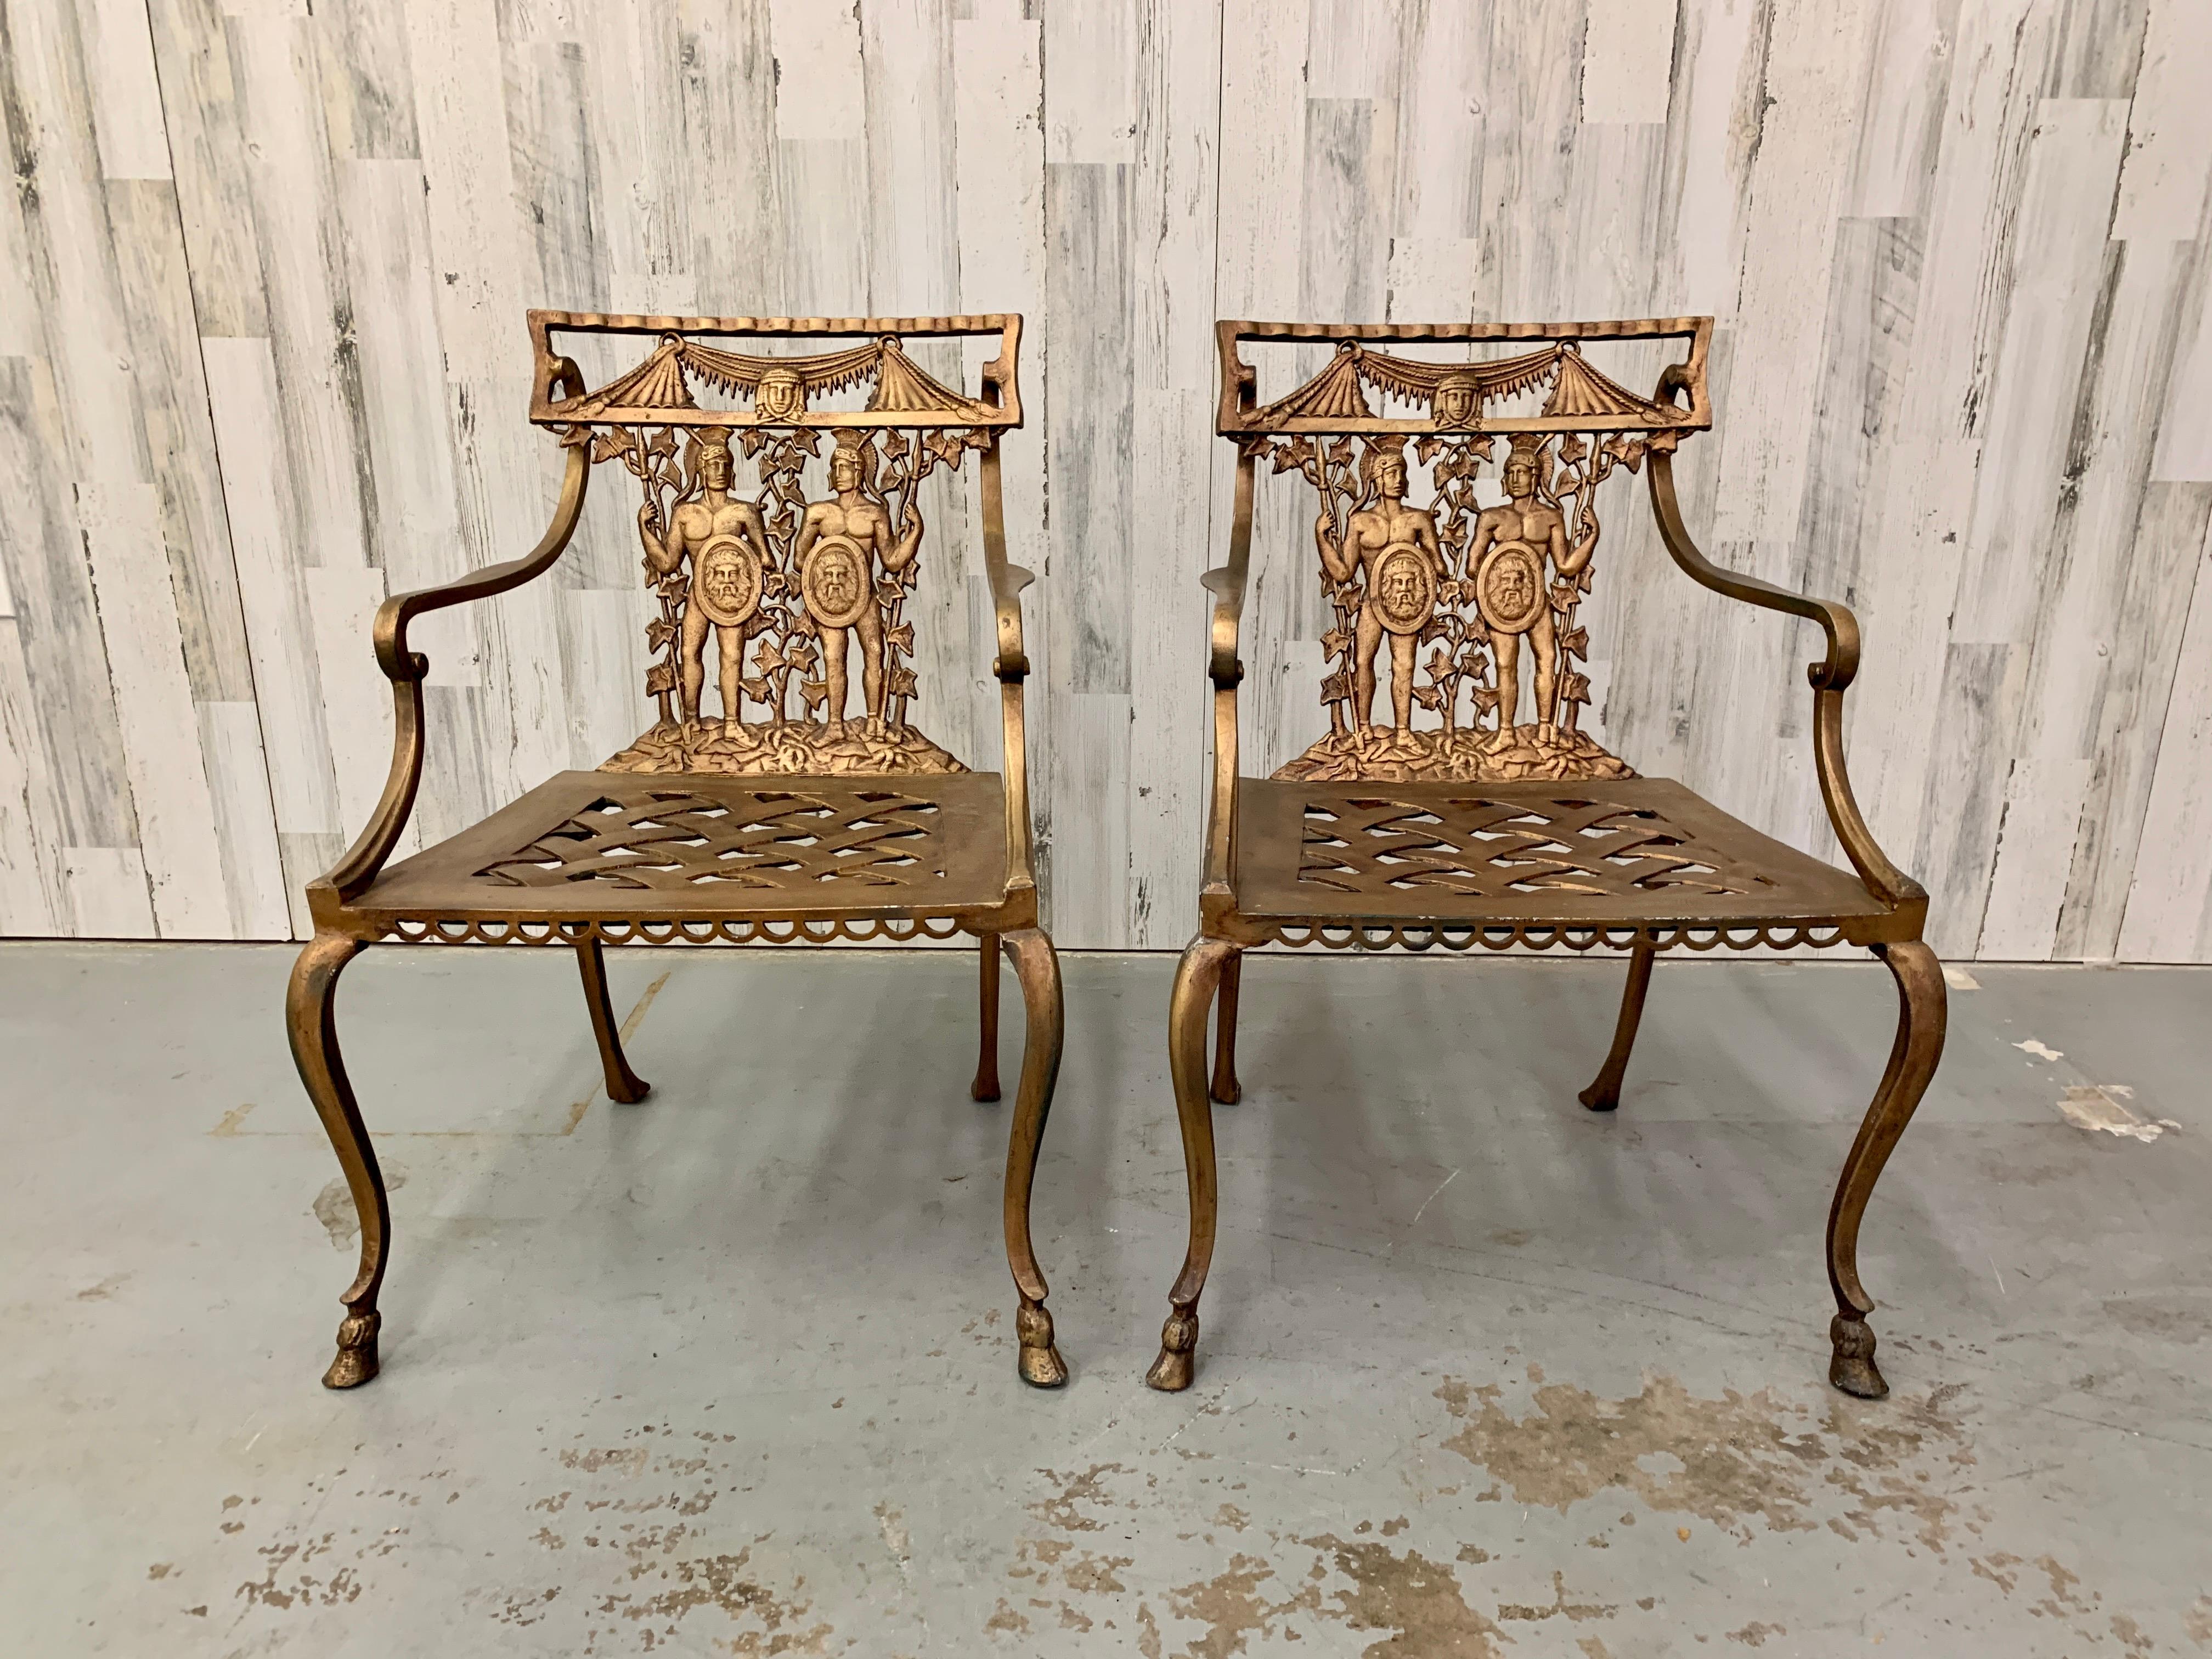 Cast metal patio chairs with Roman warriors in a gold bronze finish and basket weave seat made in Mexico Circa 1970s.